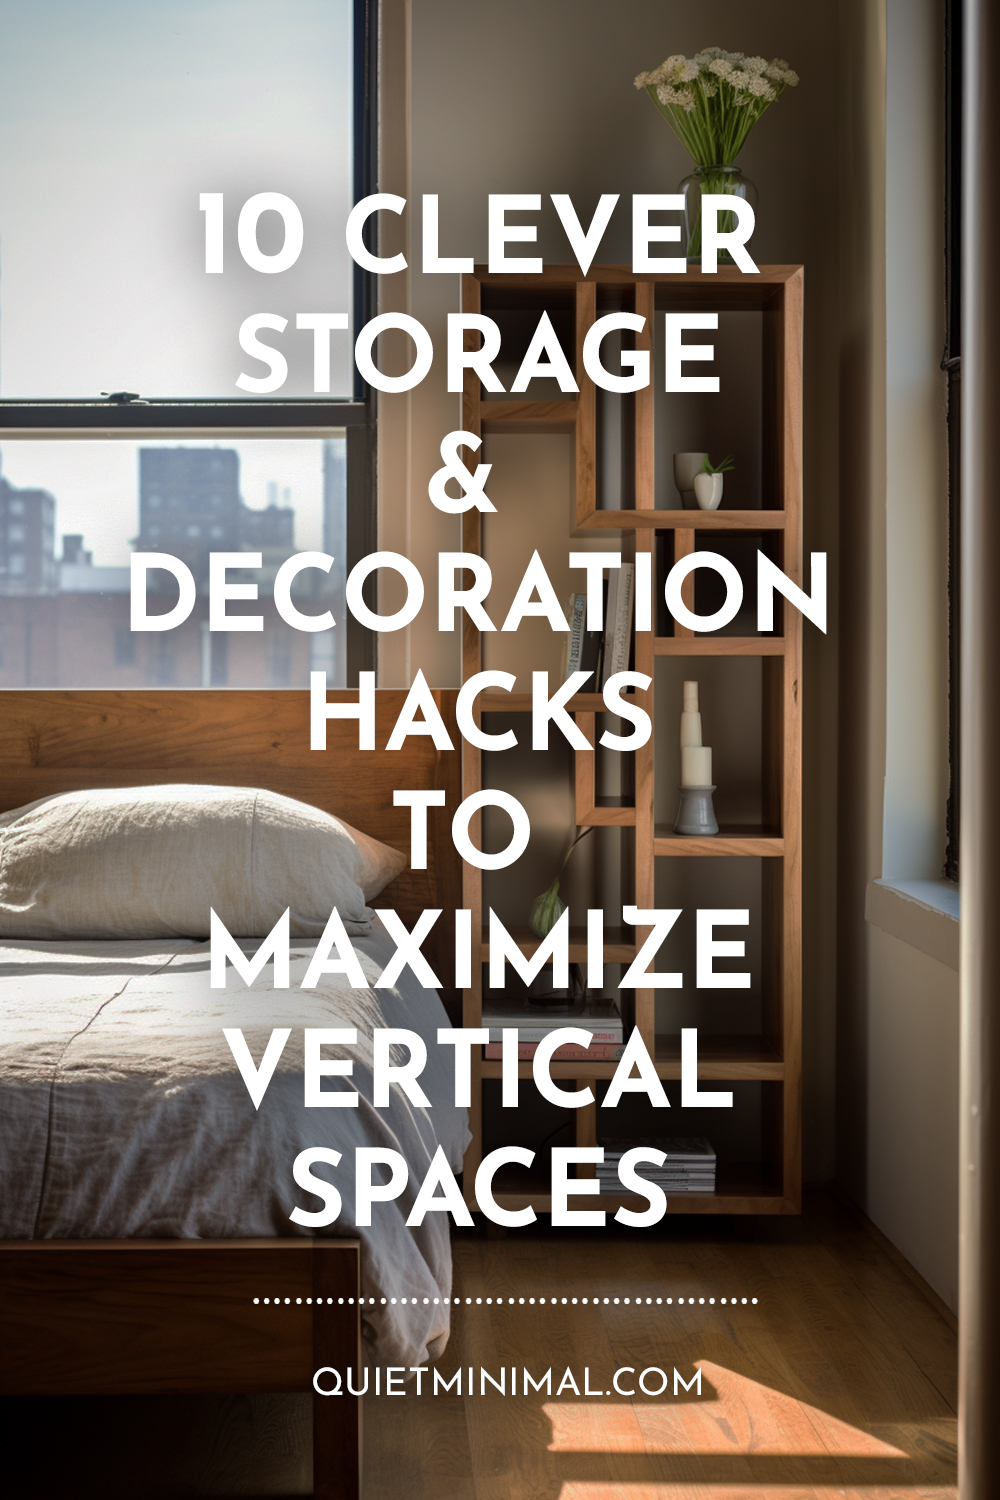 Discover 10 ingenious ways to cleverly maximize vertical spaces through storage and decoration hacks.